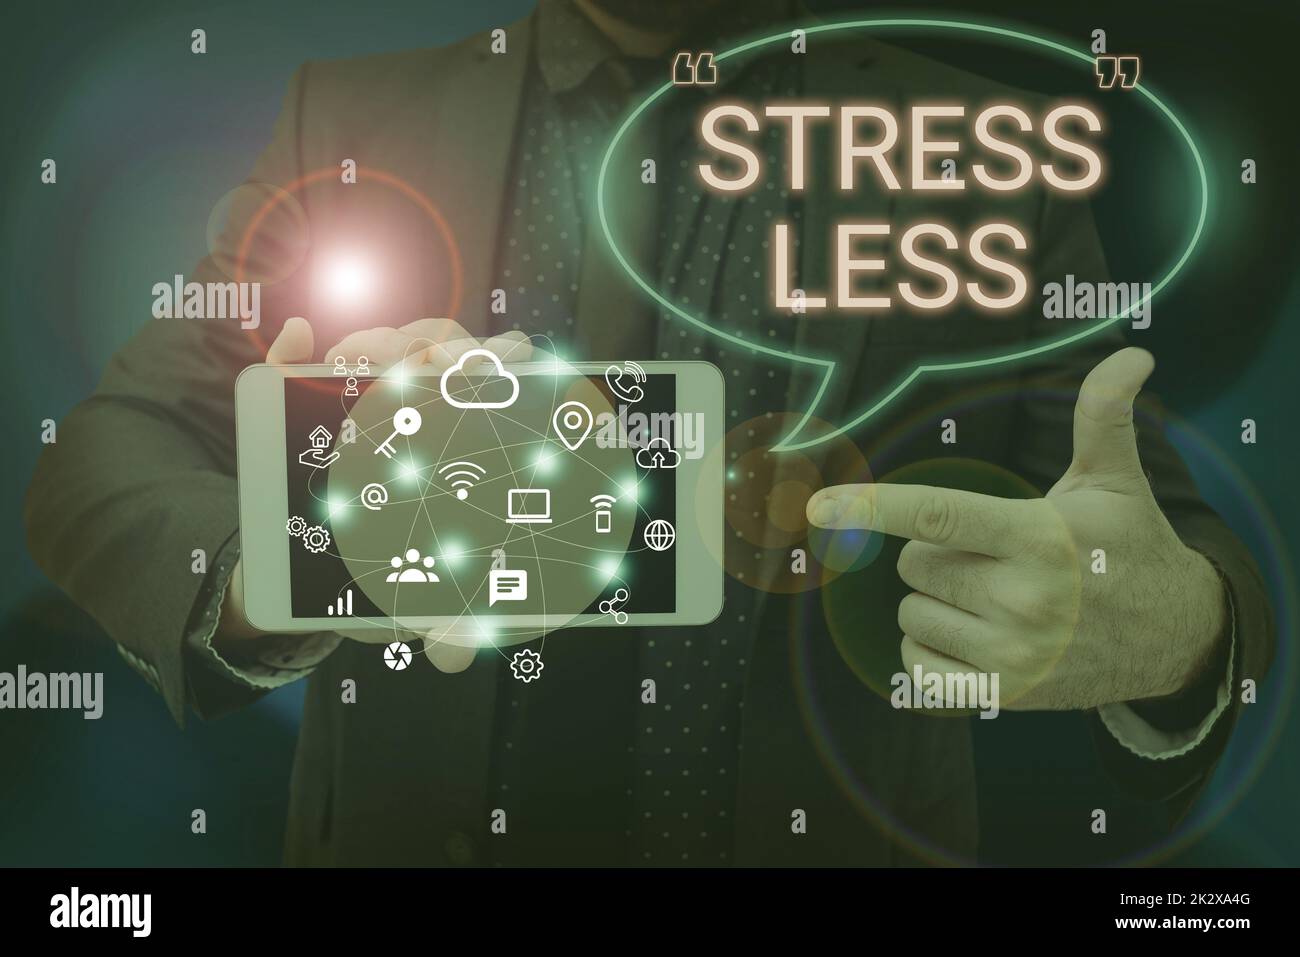 Sign displaying Stress Less. Business showcase Stay away from problems Go out Unwind Meditate Indulge Oneself Man holding Screen Of Mobile Phone Showing The Futuristic Technology. Stock Photo